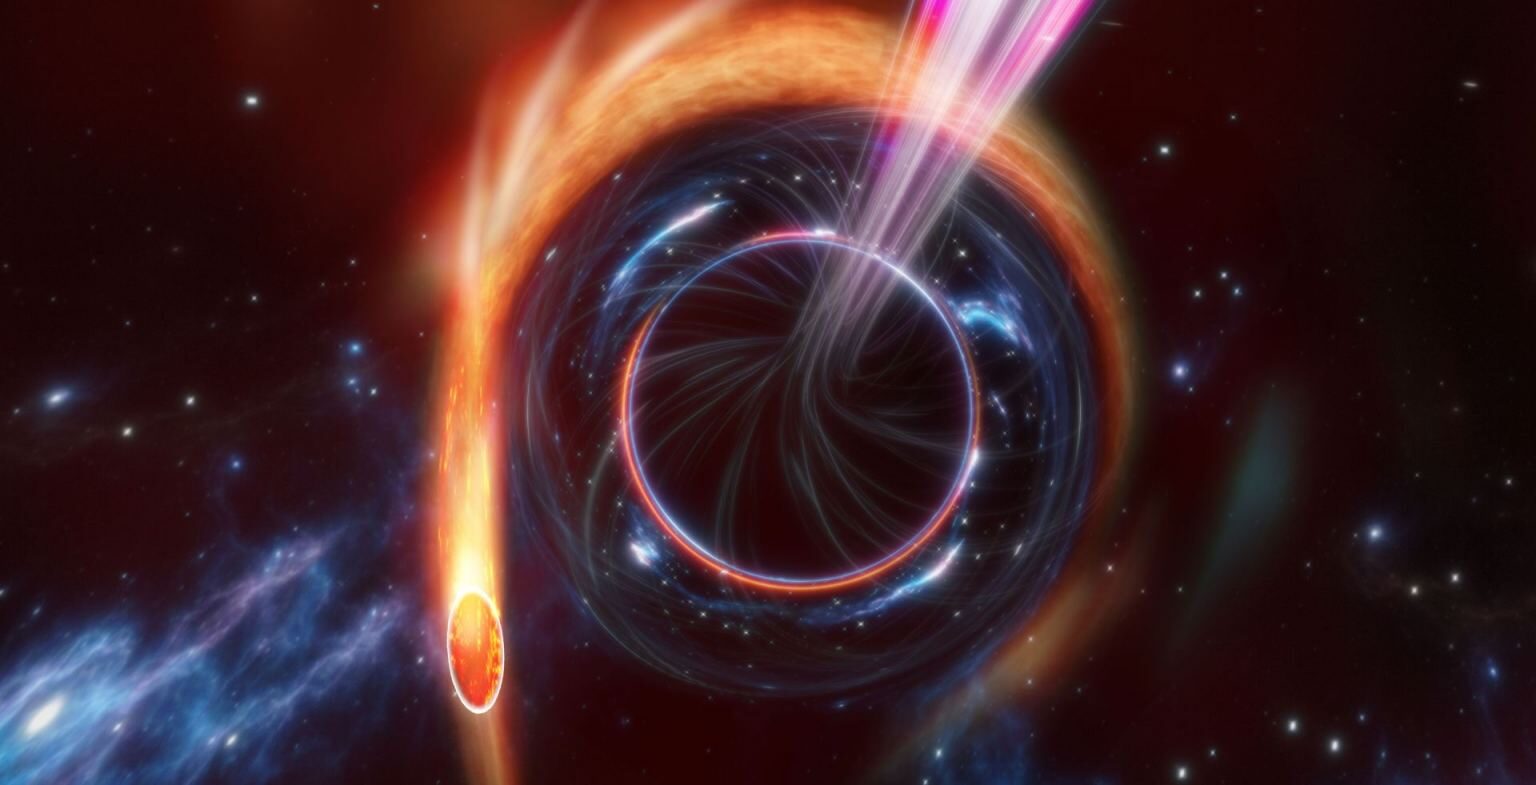 supermassive black hole consuming a star